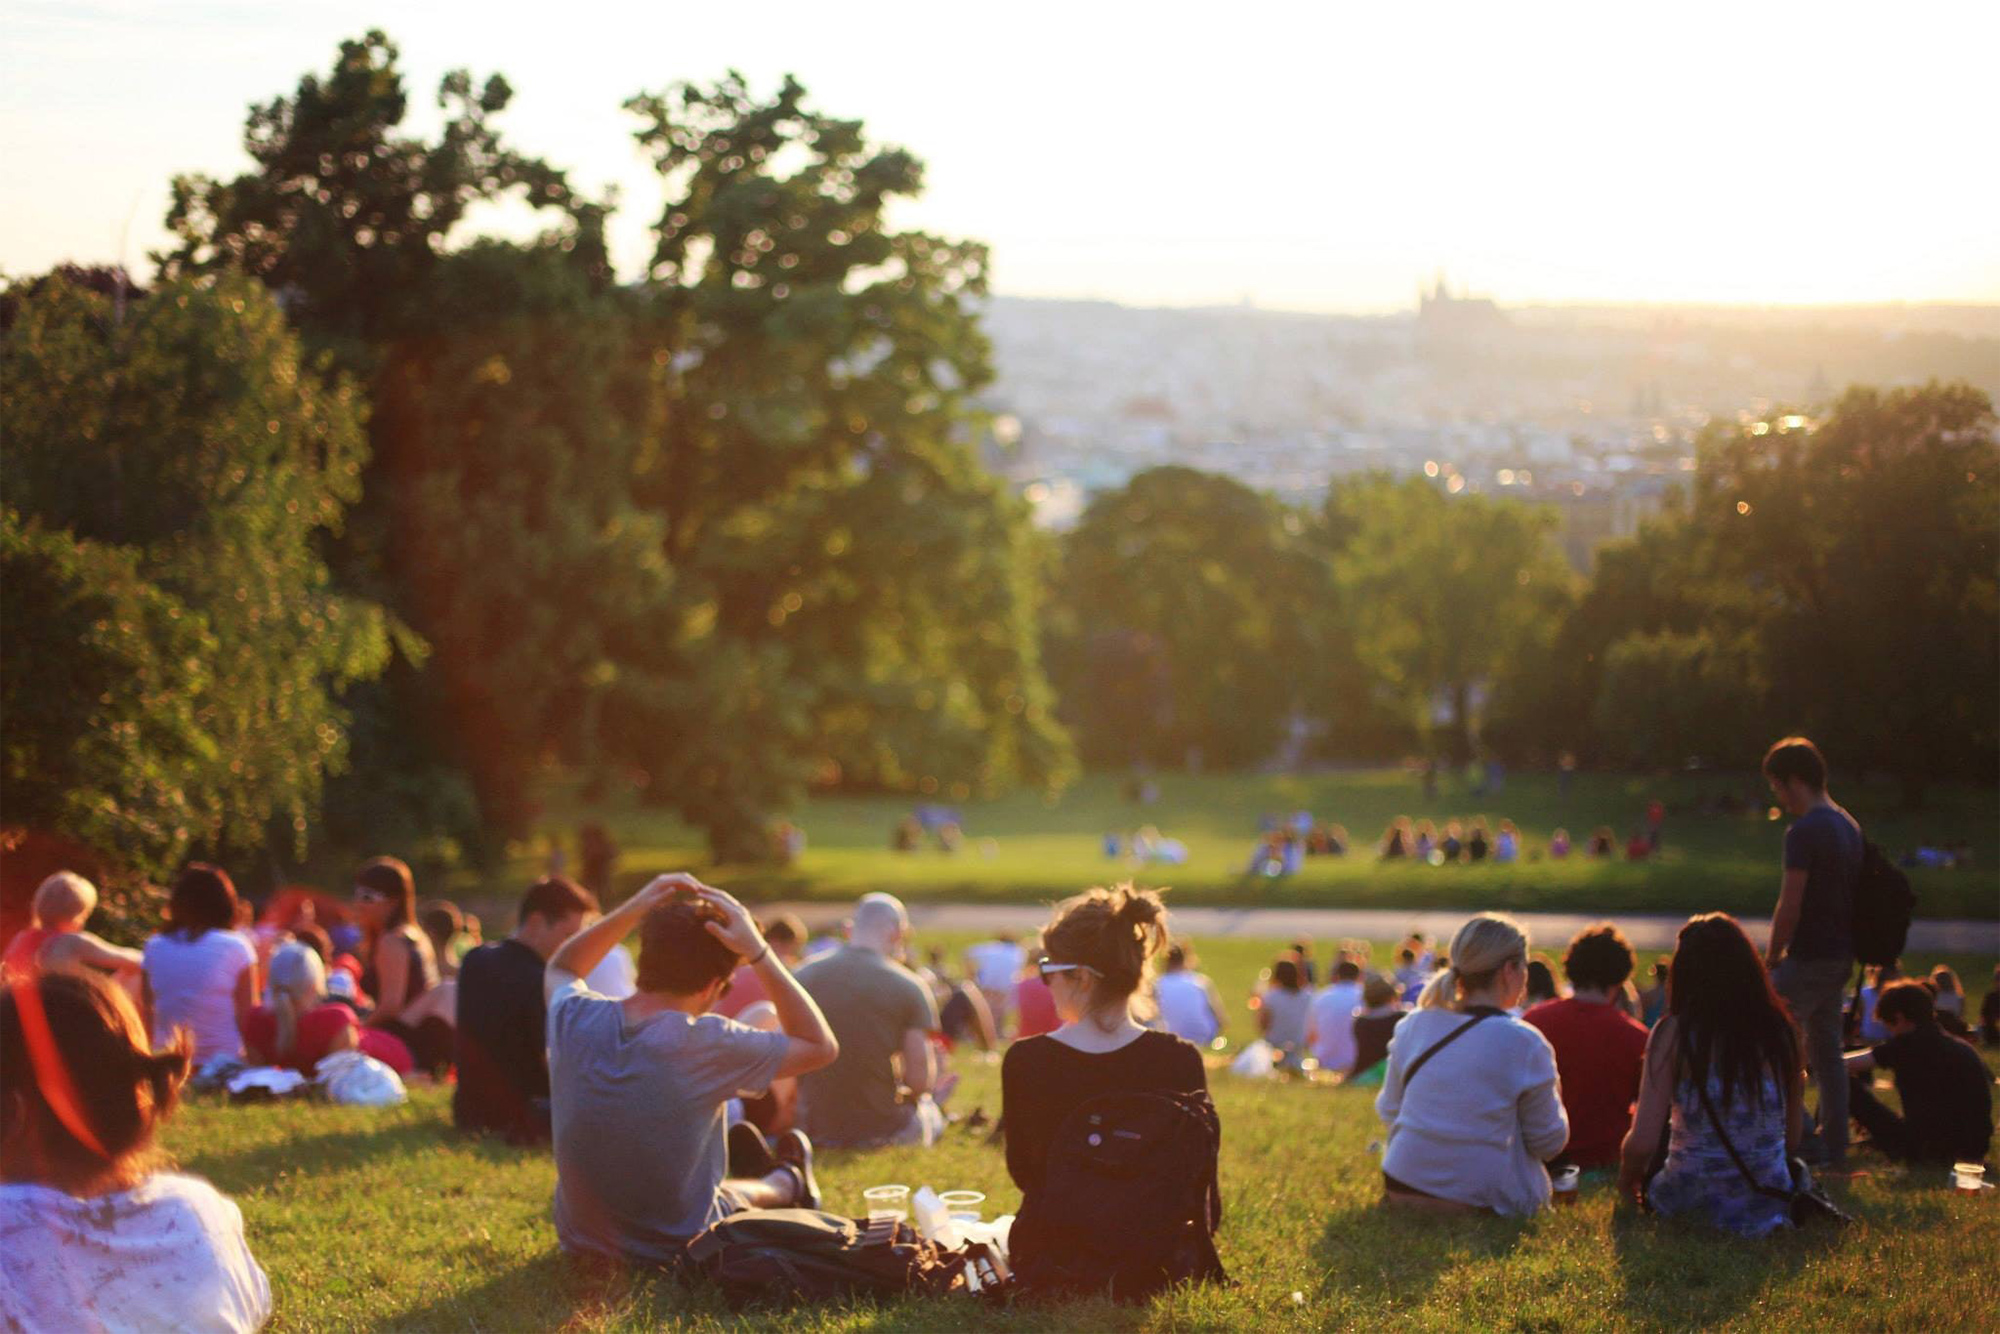 scenic view of picnic goers in a park